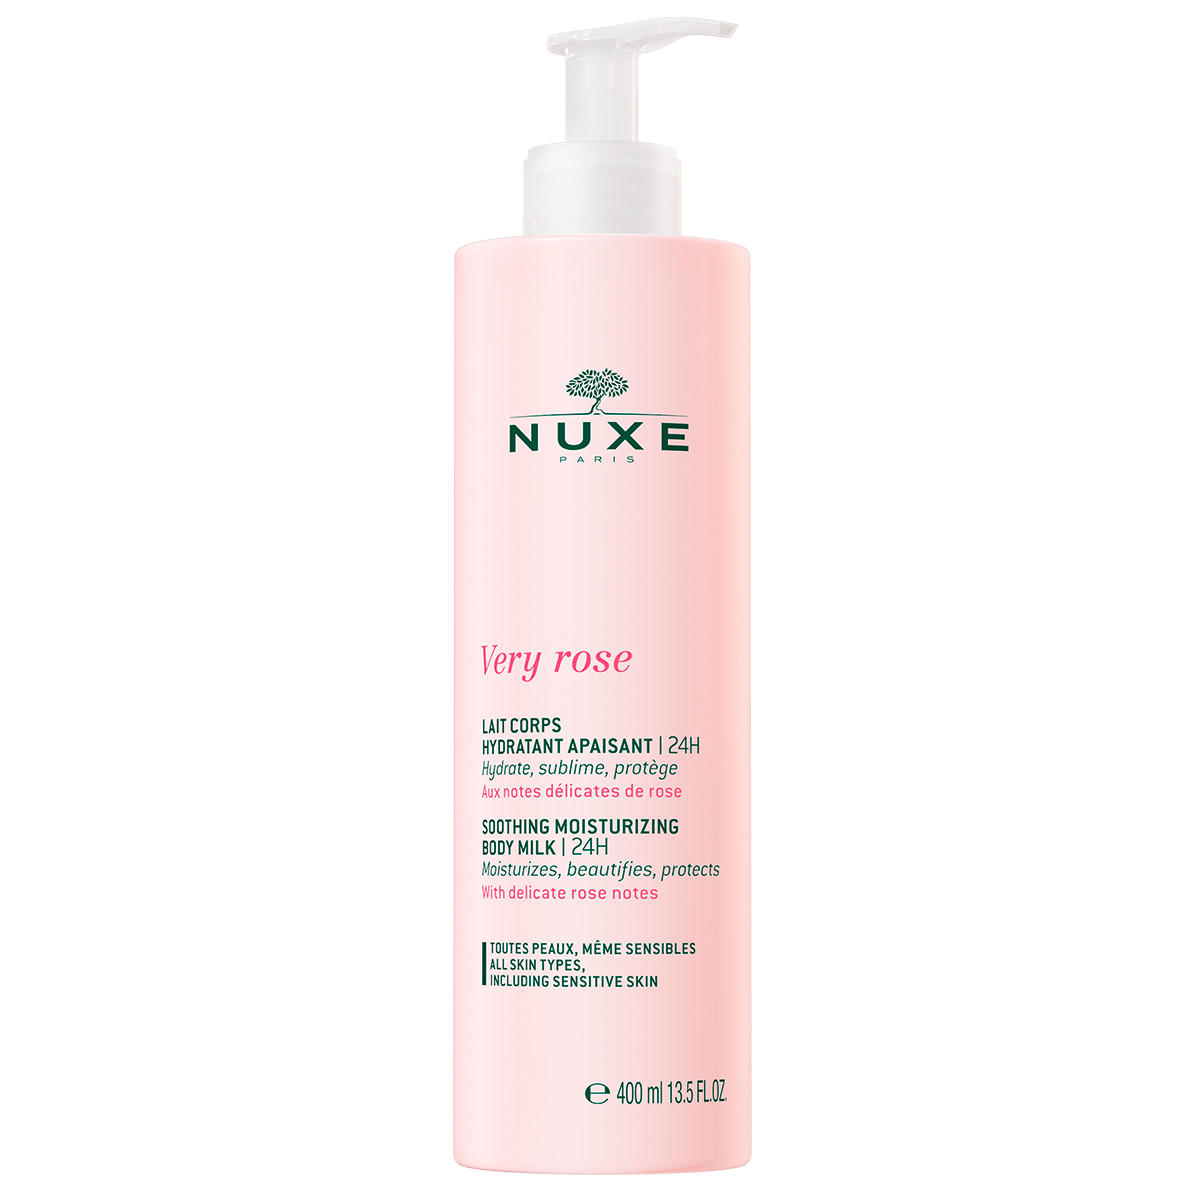 NUXE Very Rose Soothing Moisturizing Body Milk 400 ml - 1